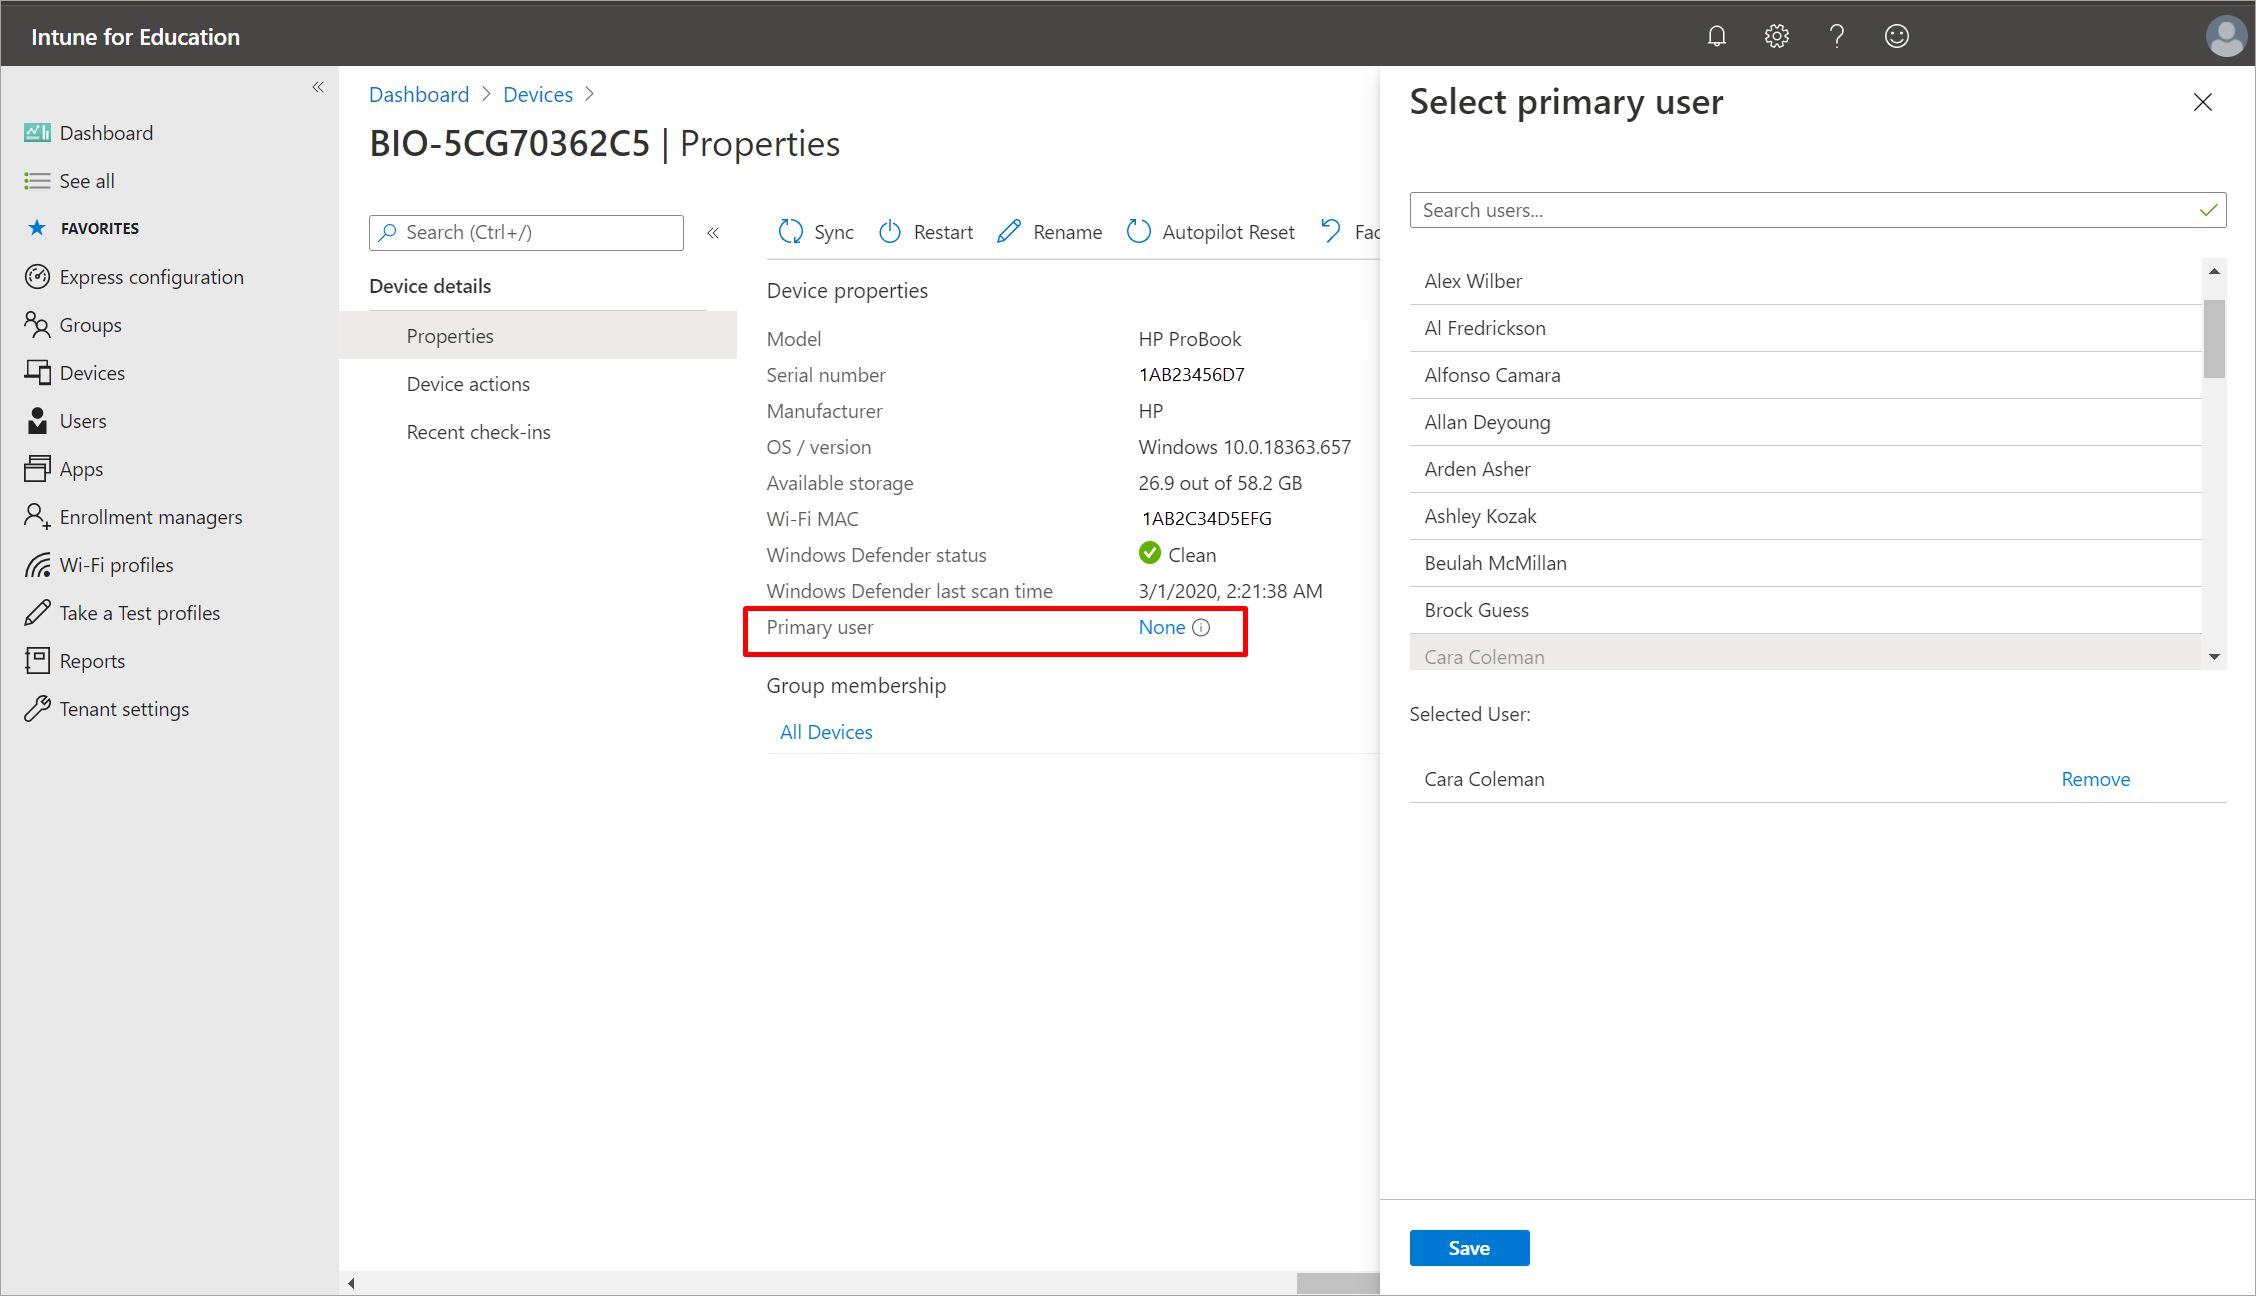 Screenshot of Devices > Device details > Properties section, highlighting "Primary user" setting and showing *Select primary user" pane.